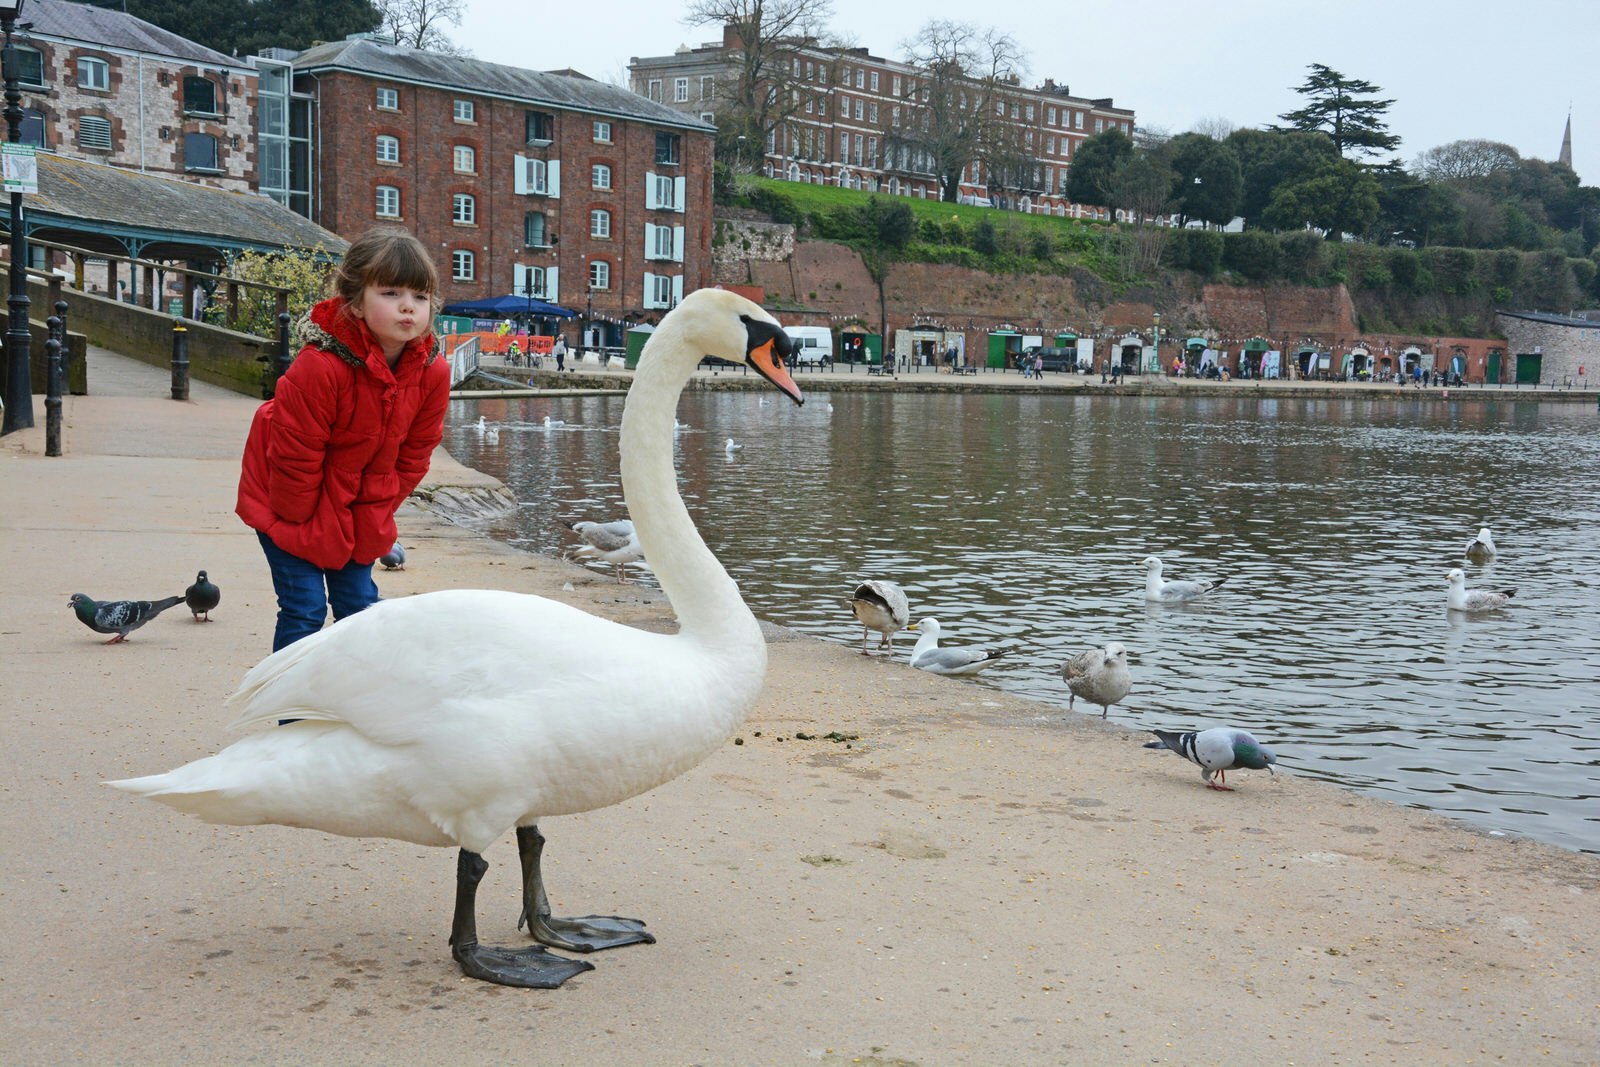 Tour guide Alice poses next to a swan on Exeter quay © Patrick Kinsella / Lonely Planet